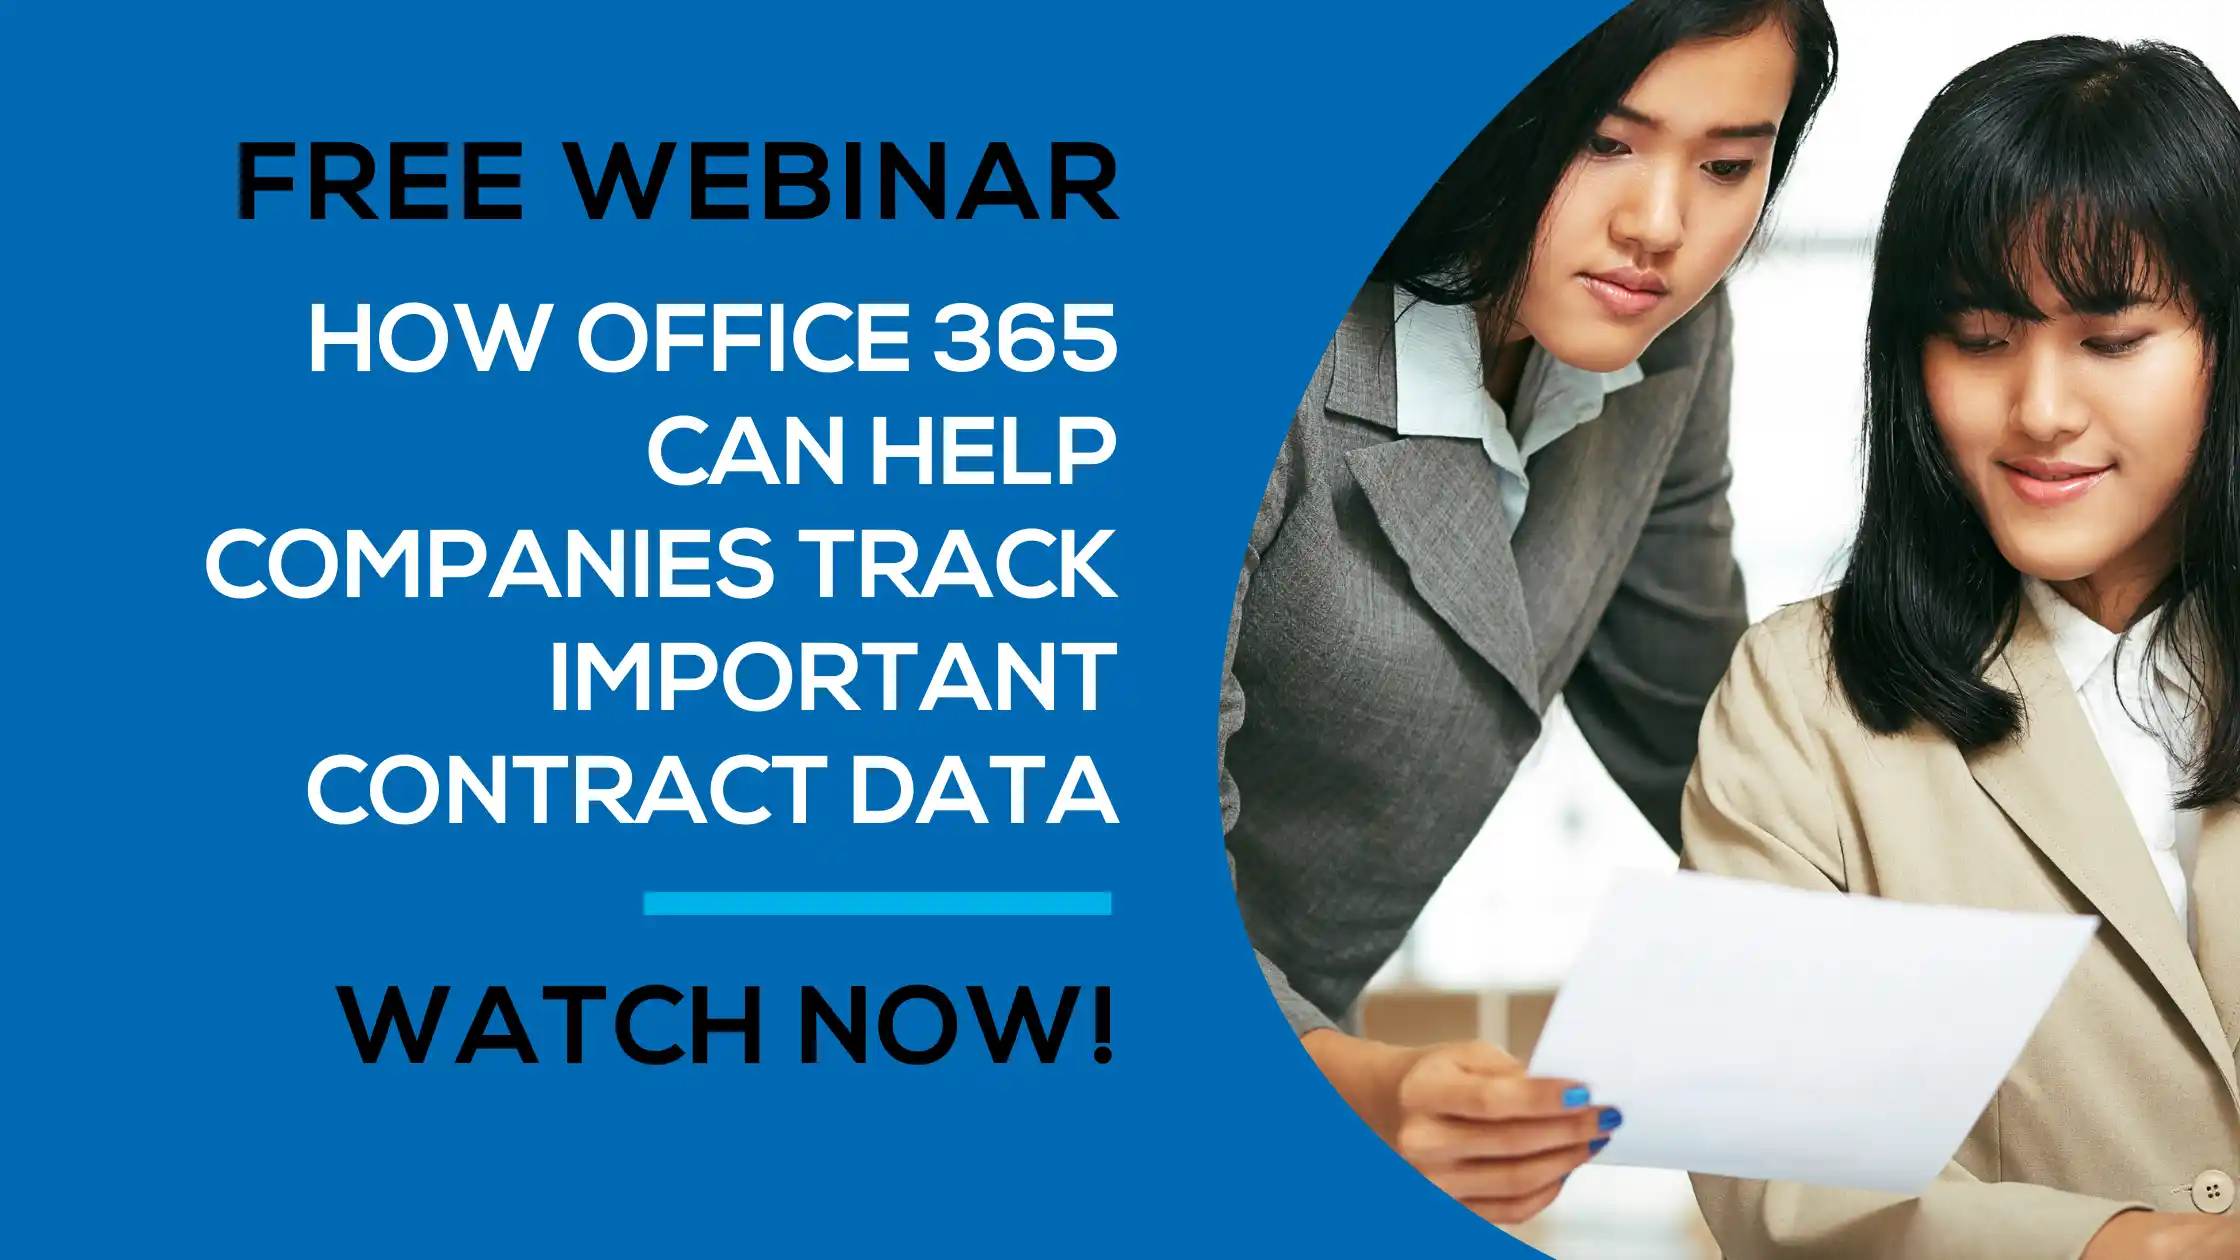 Webinar - How Office 365 Can Help Companies Track Important Contract Data